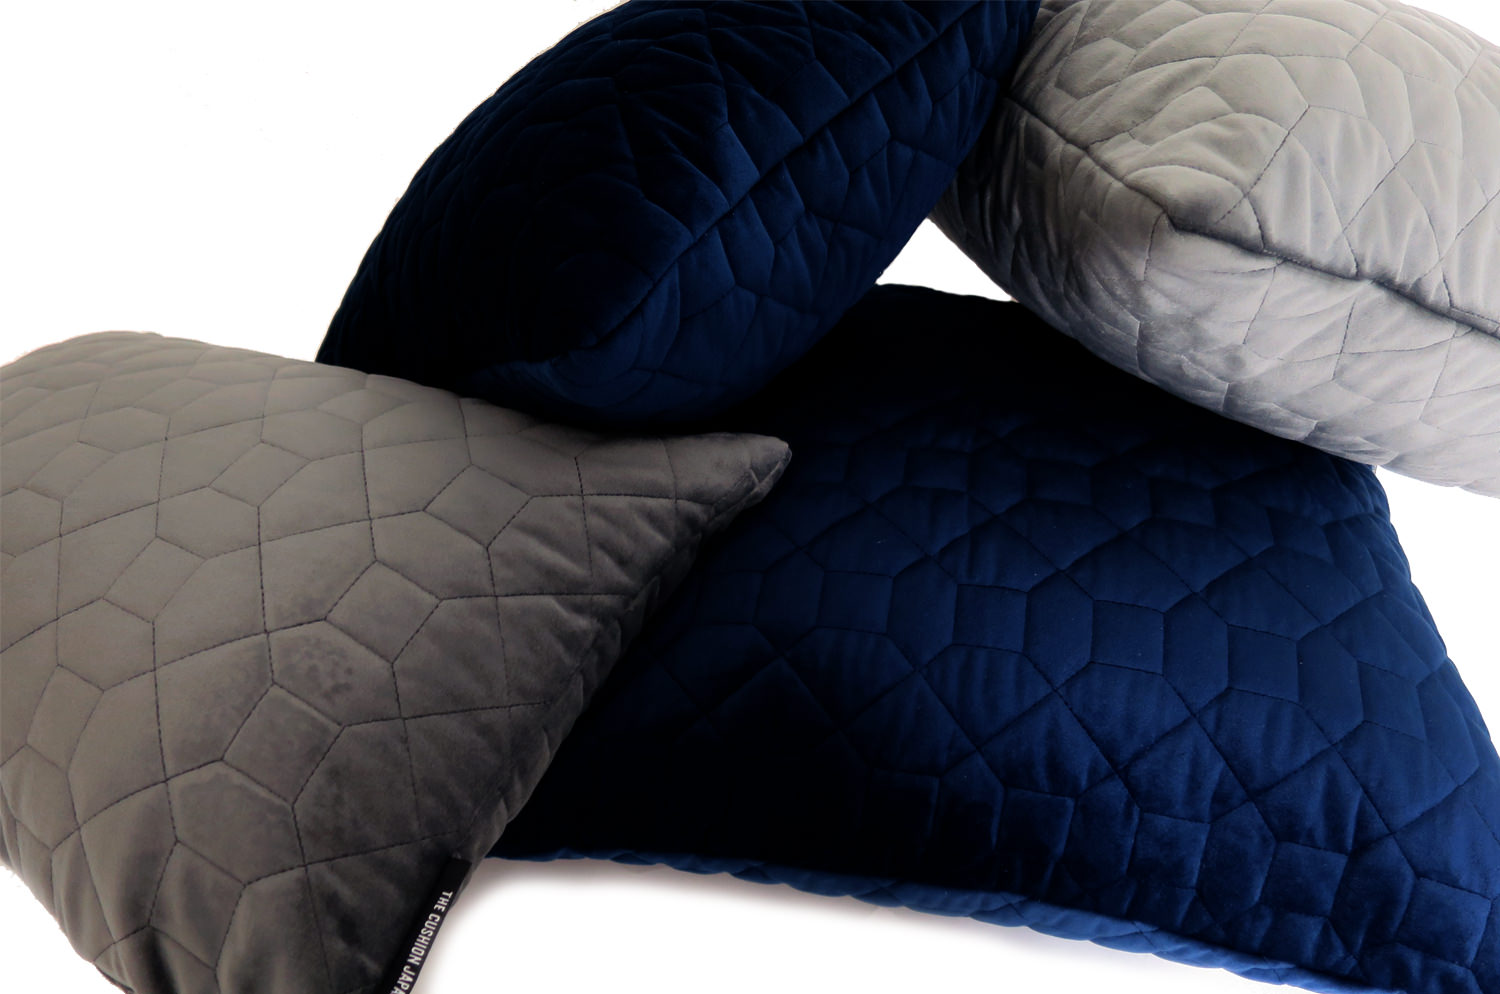 quilted-atlantic4530